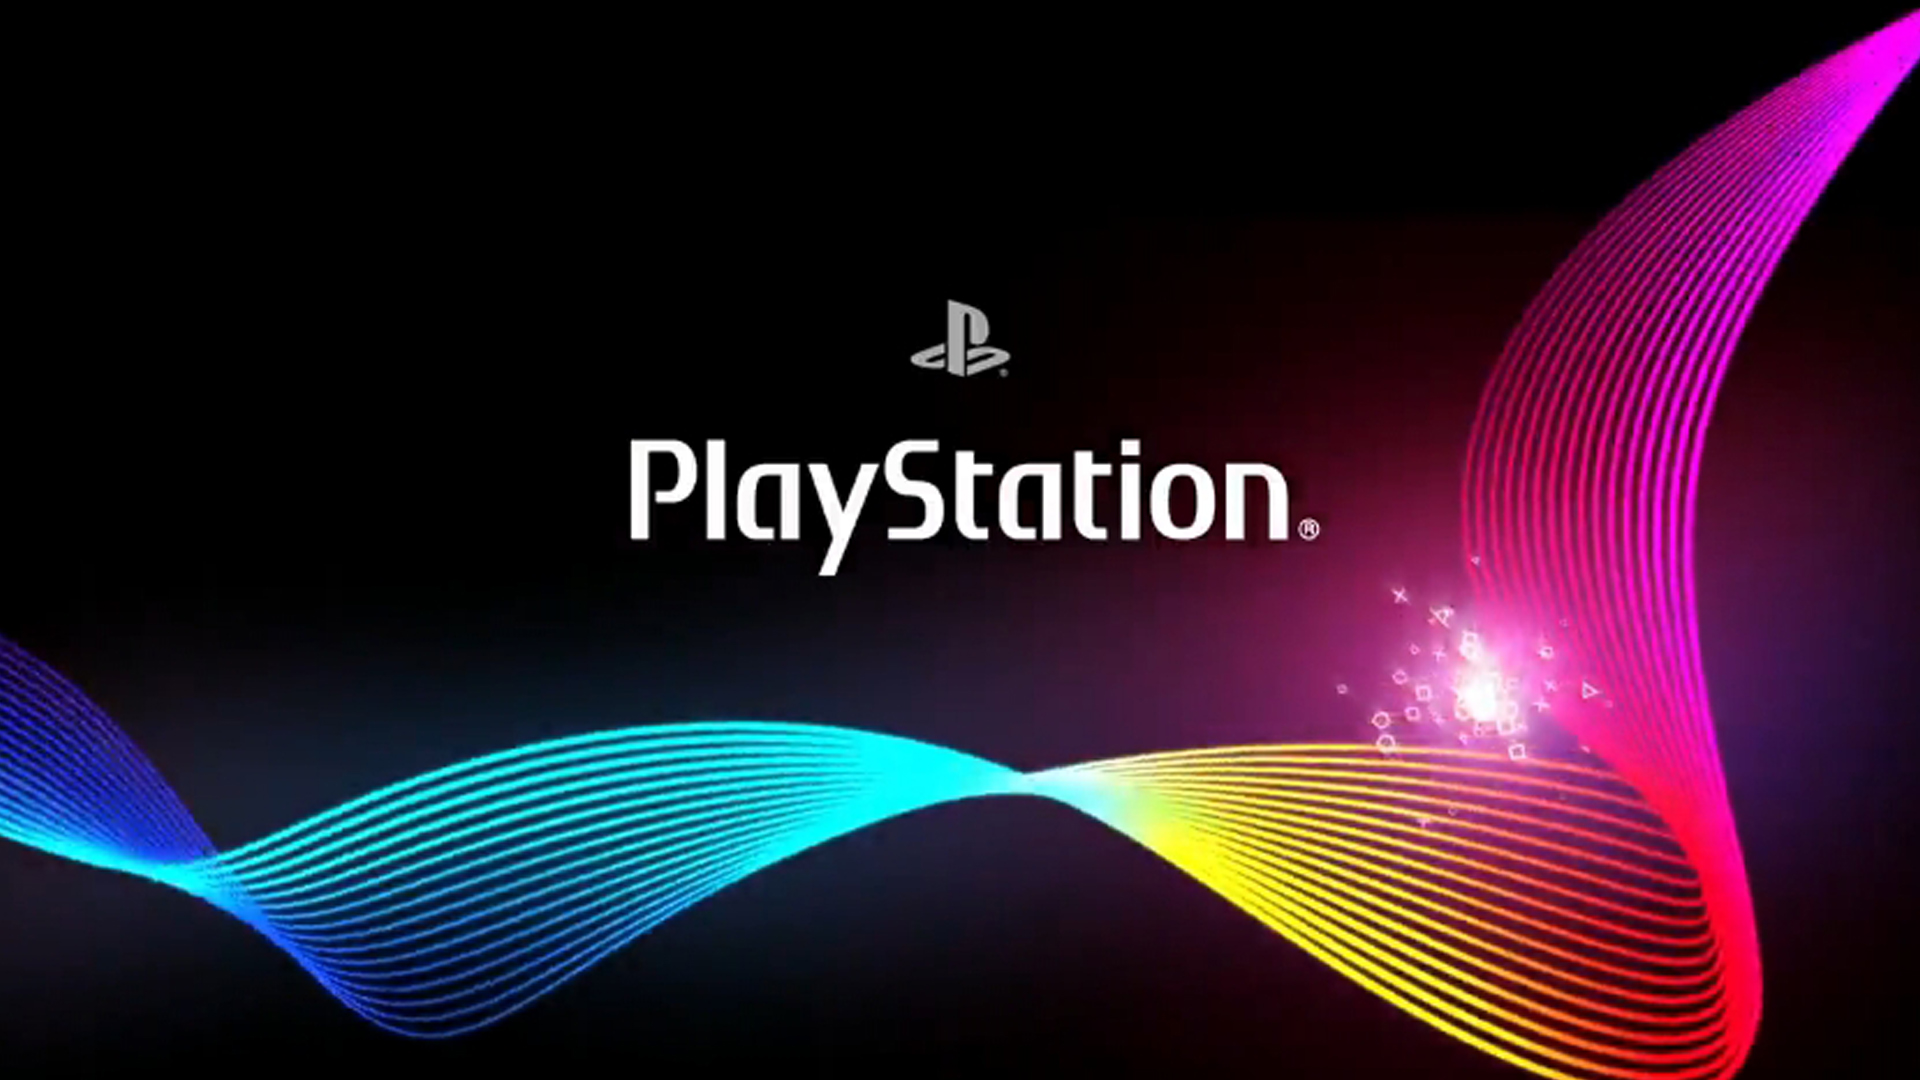 Playstation Wallpaper Game HD Ps3 Video